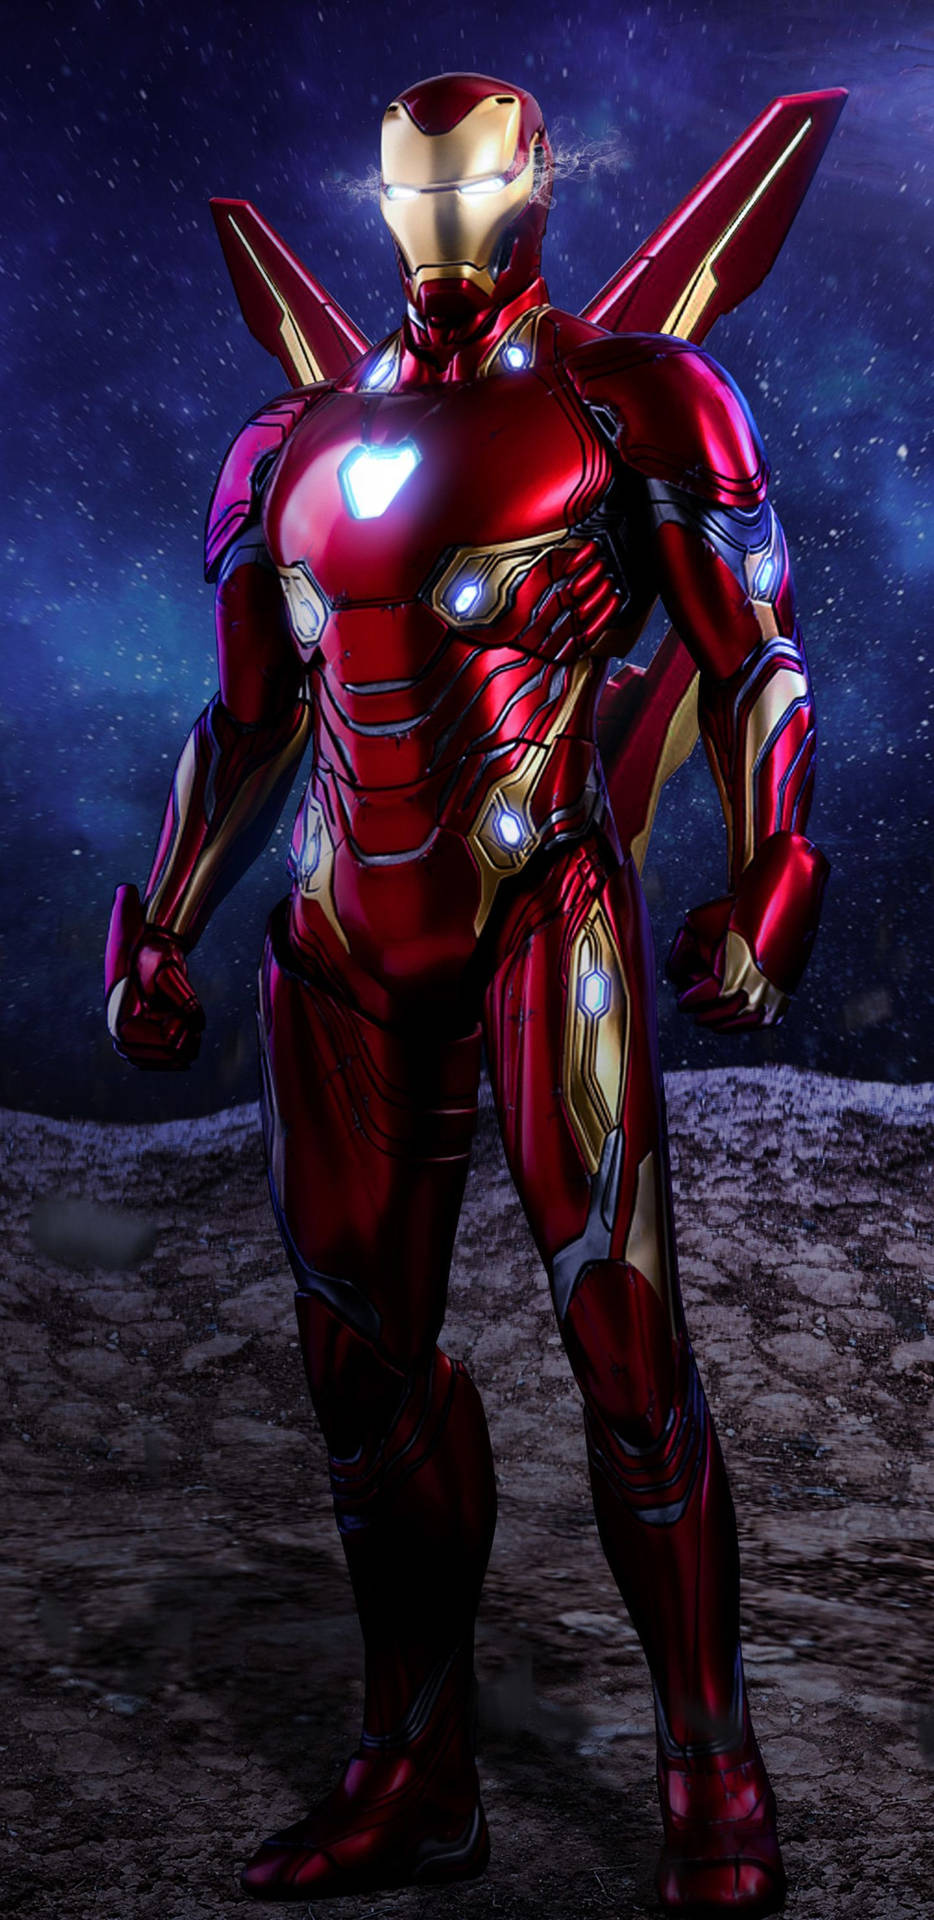 Suit Wings Iron Man Android Wallpaper